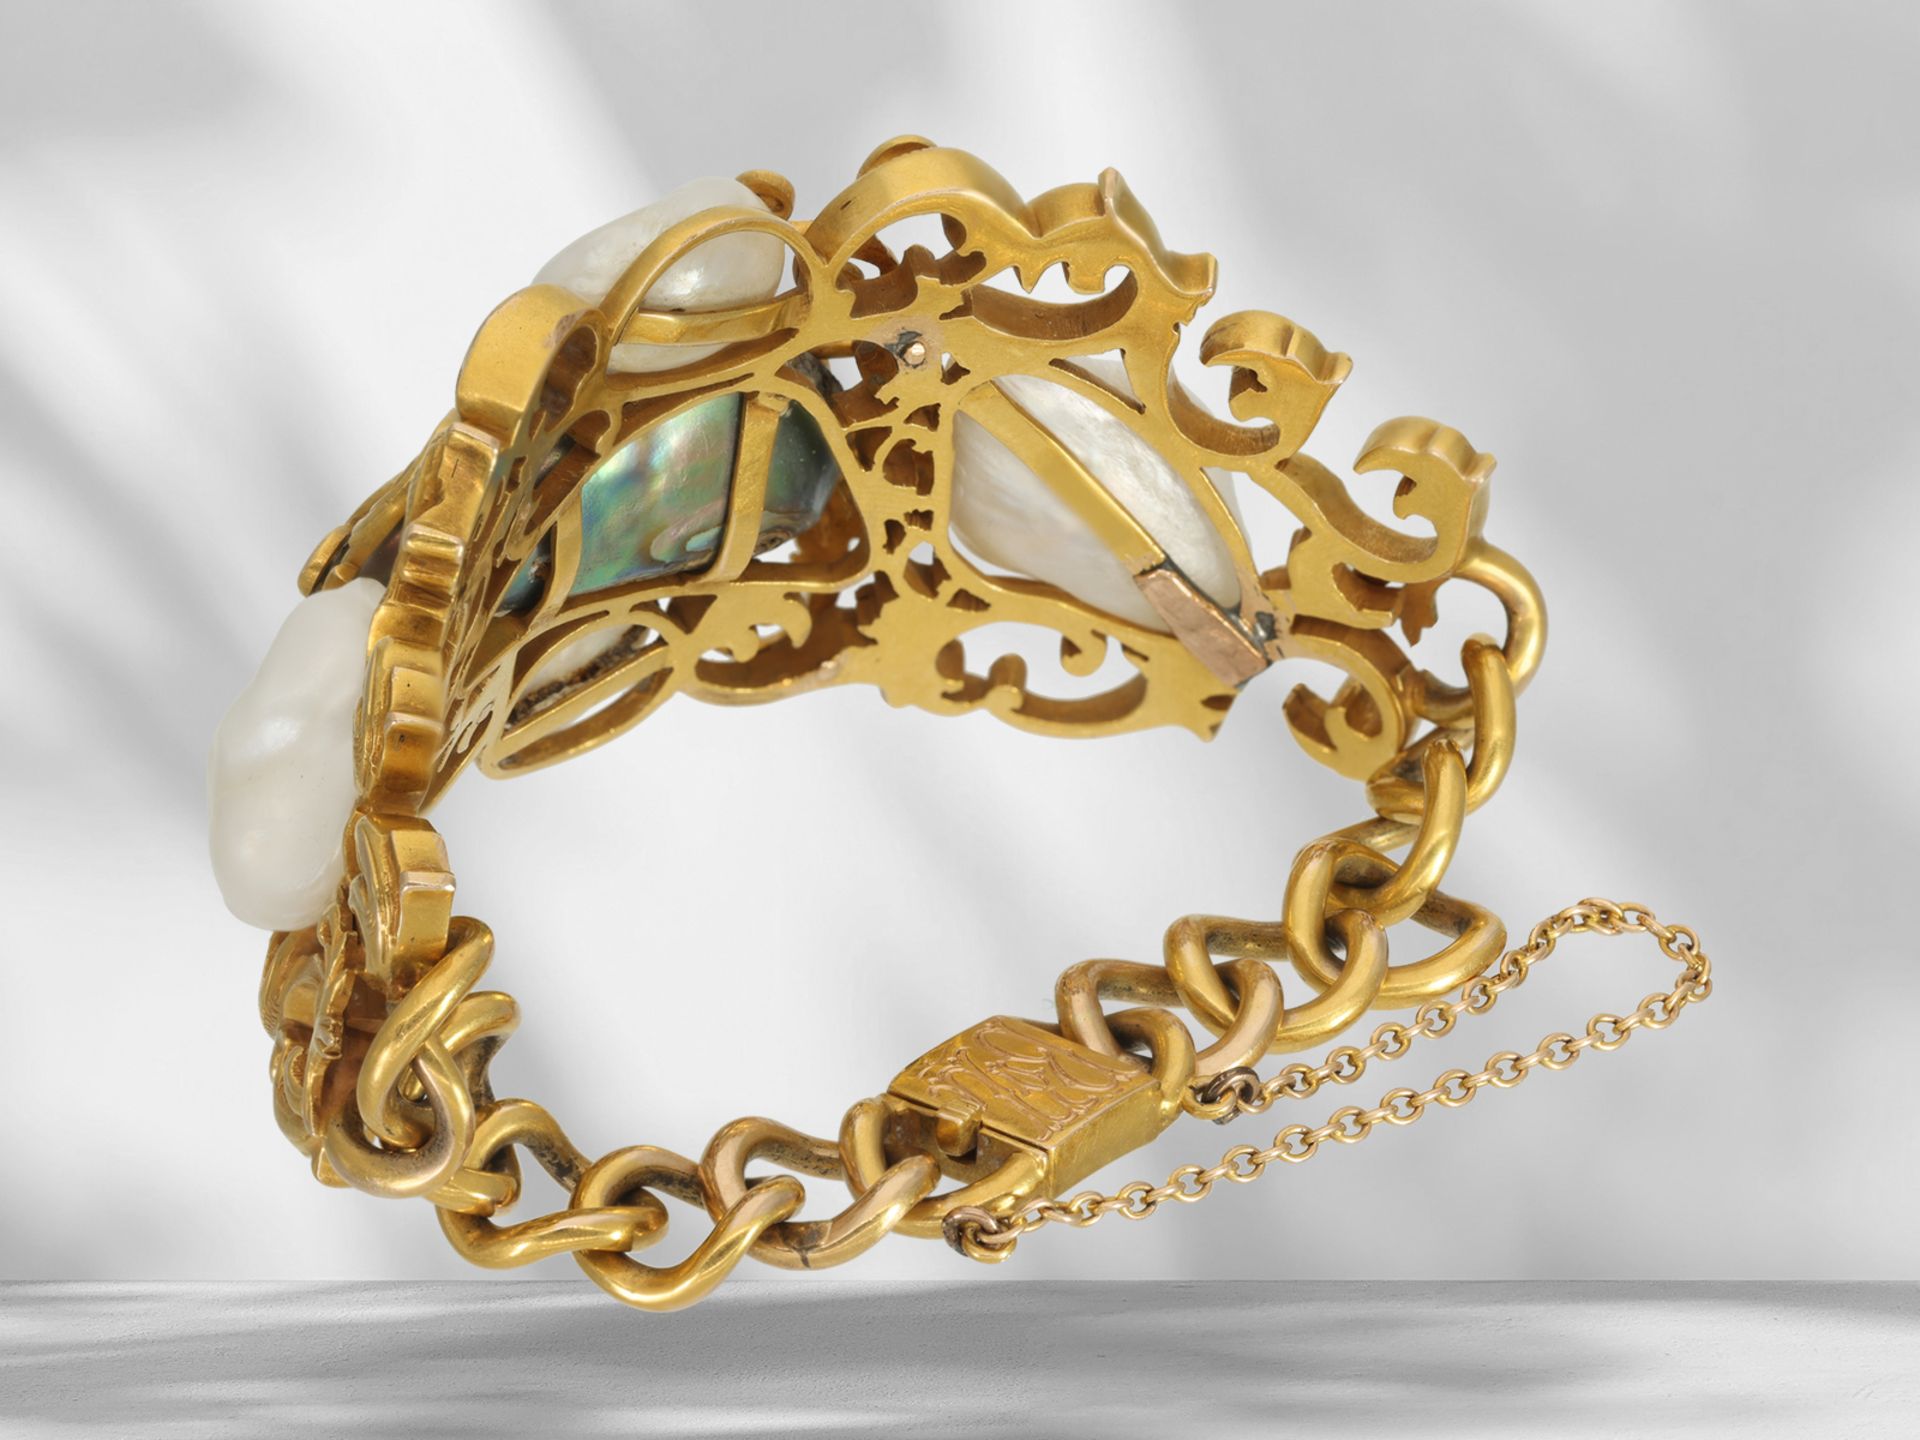 Bracelet: interesting and very unusual antique bracelet/bangle with rare baroque pearls, around 1900 - Image 5 of 7